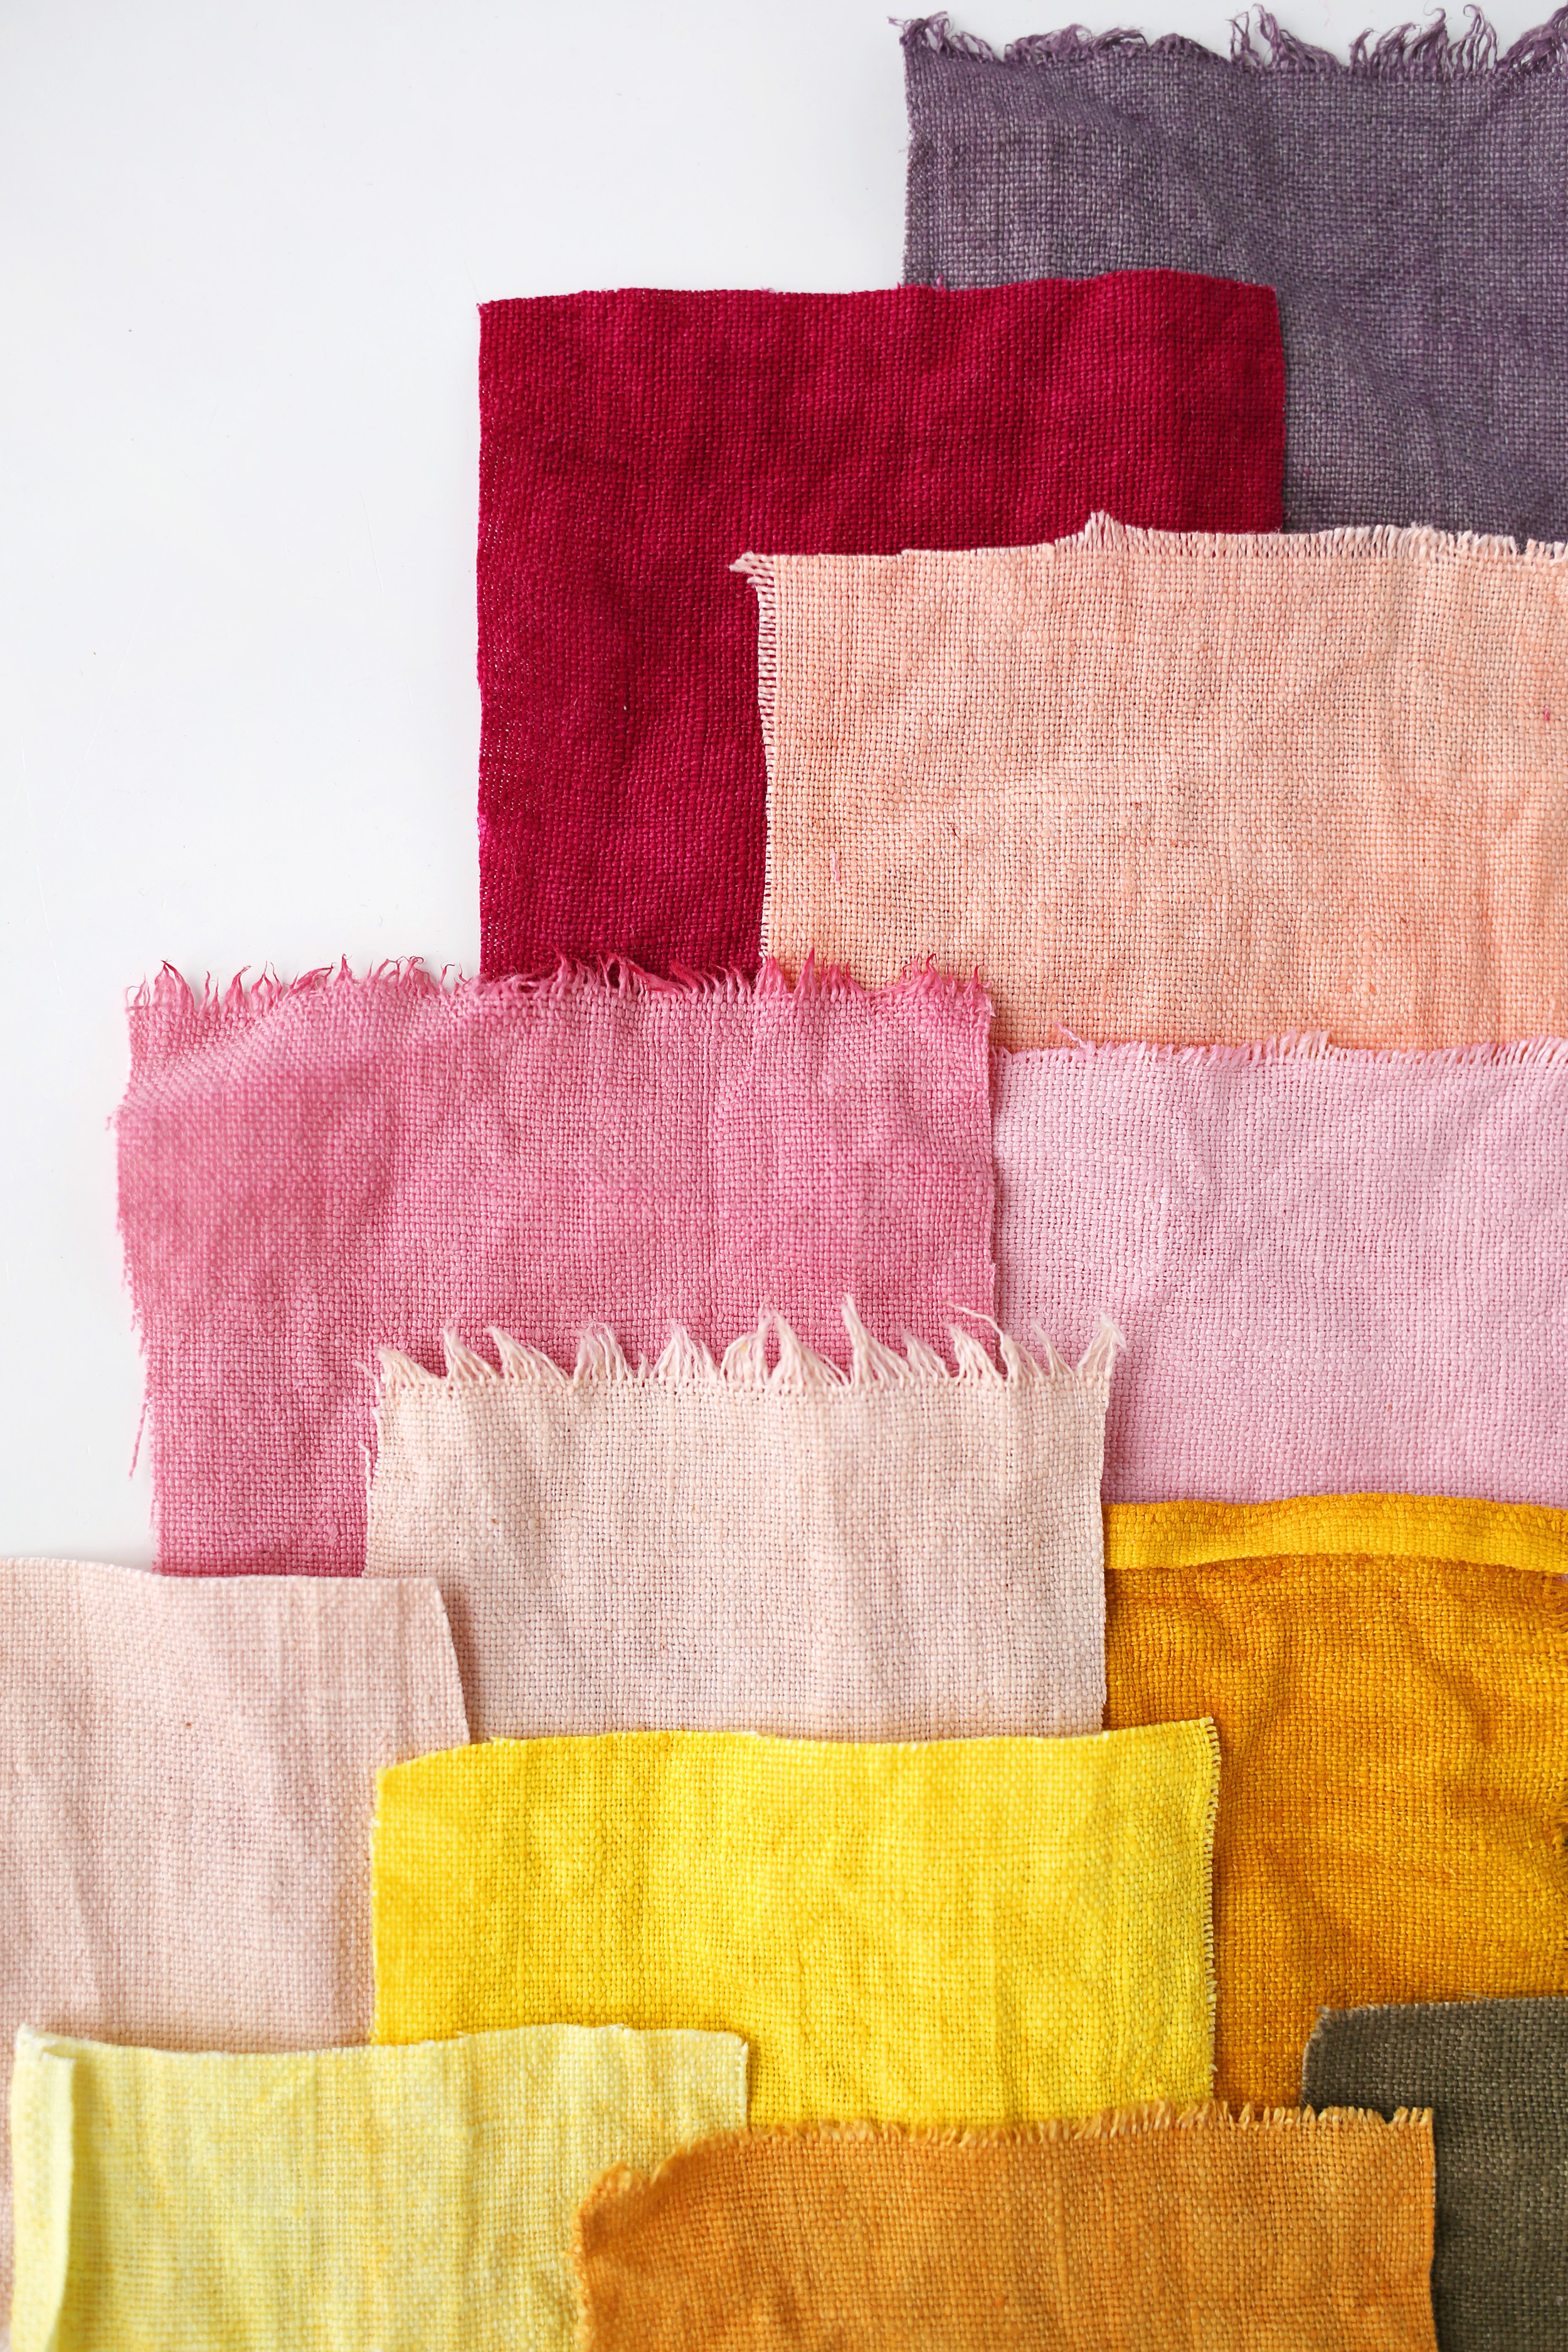 A wide range of colors from natural dyes